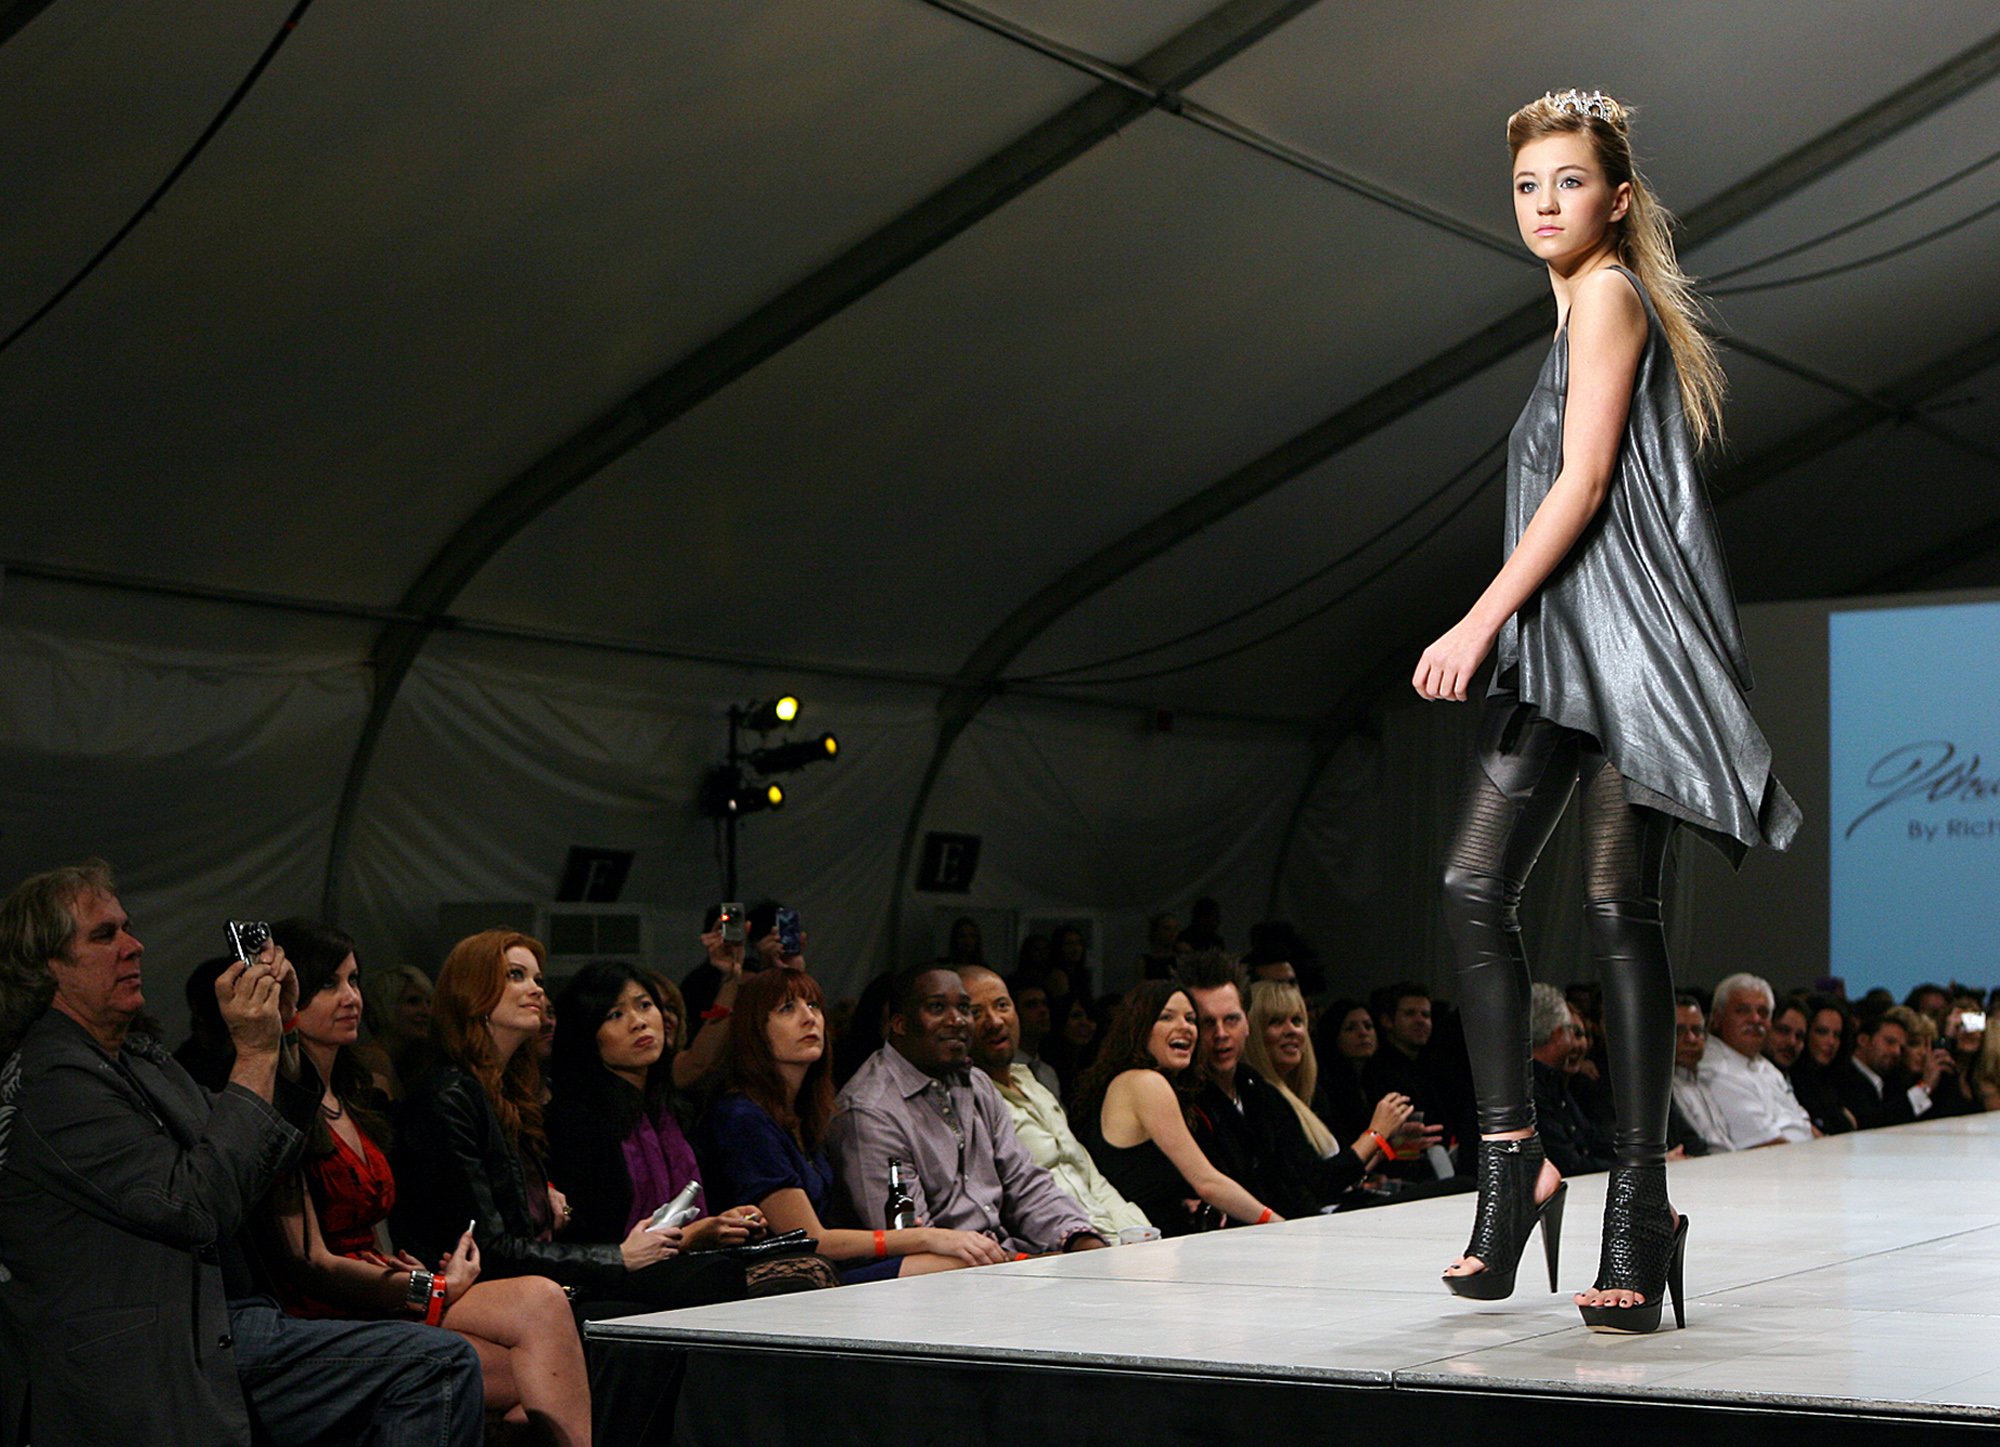 HOW TO PREPARE FOR YOUR FIRST EVER RUNWAY MODELING